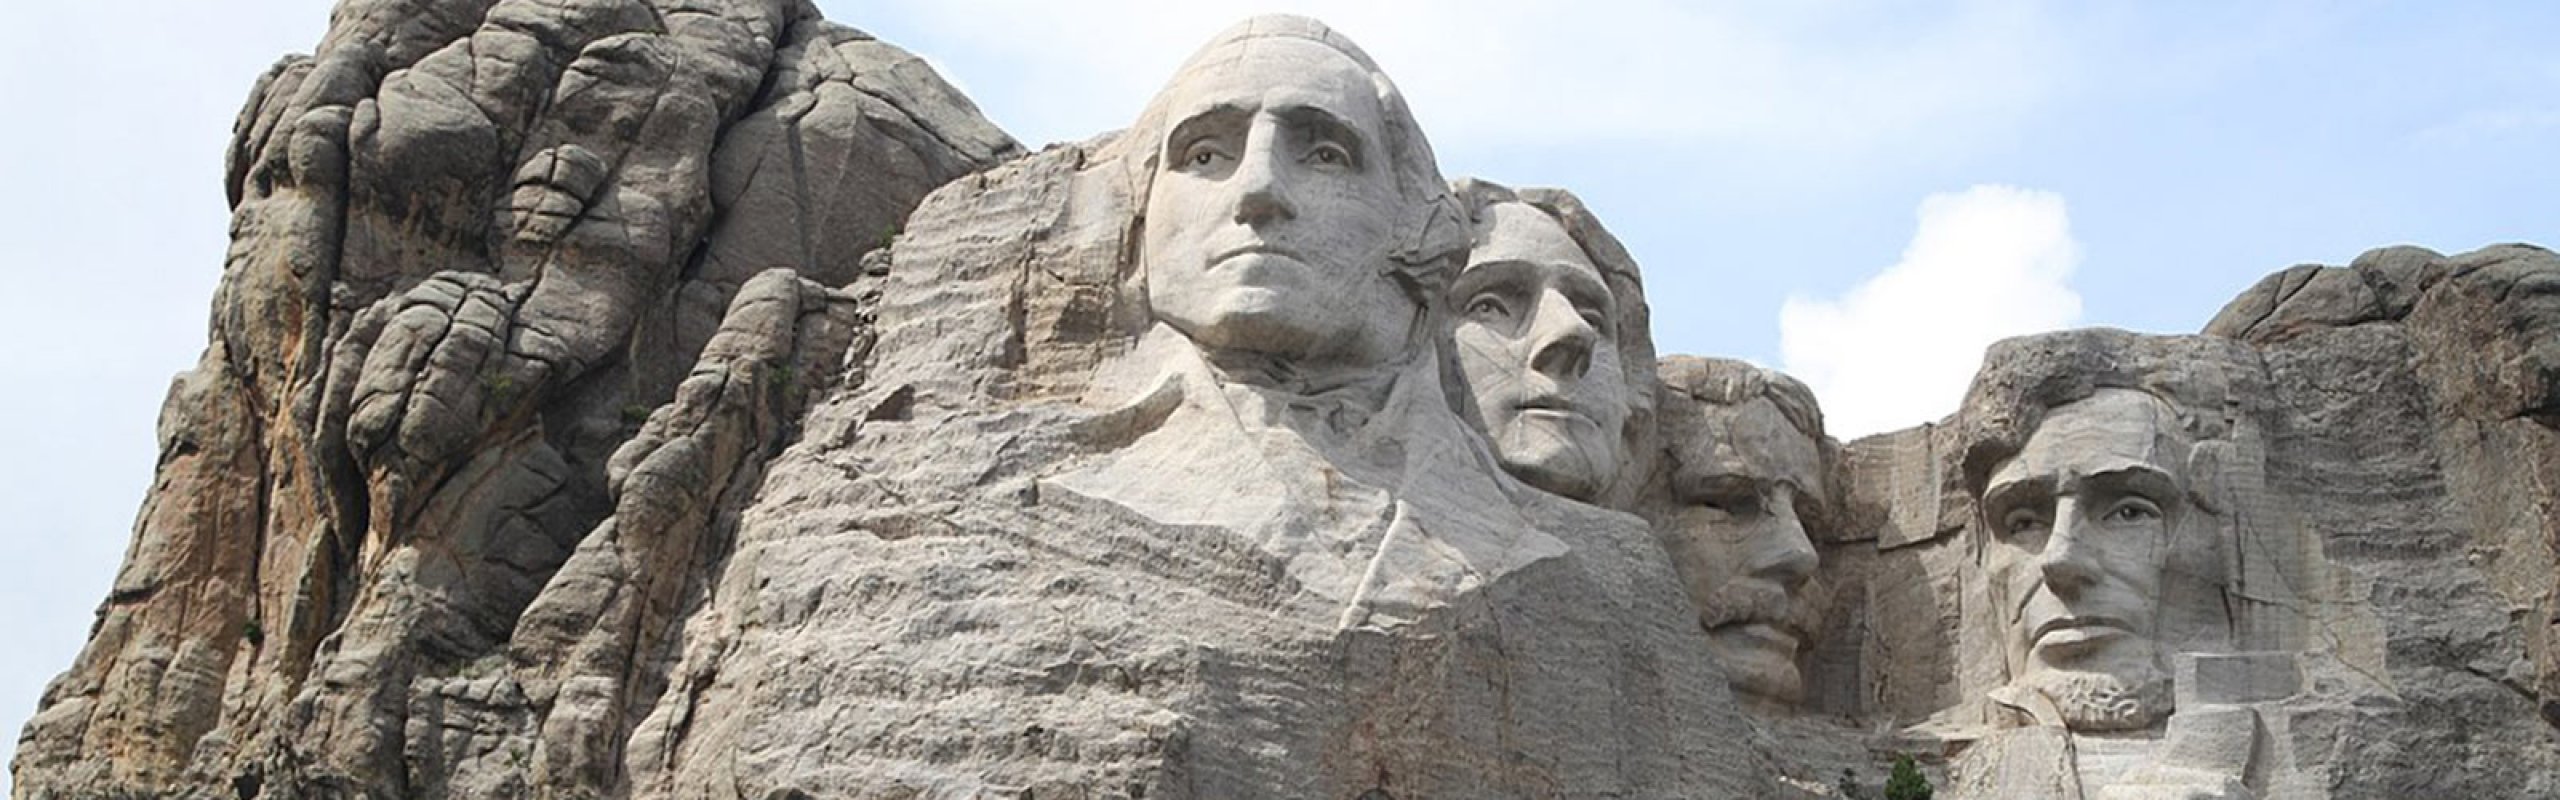 Love letters from Mount Rushmore 